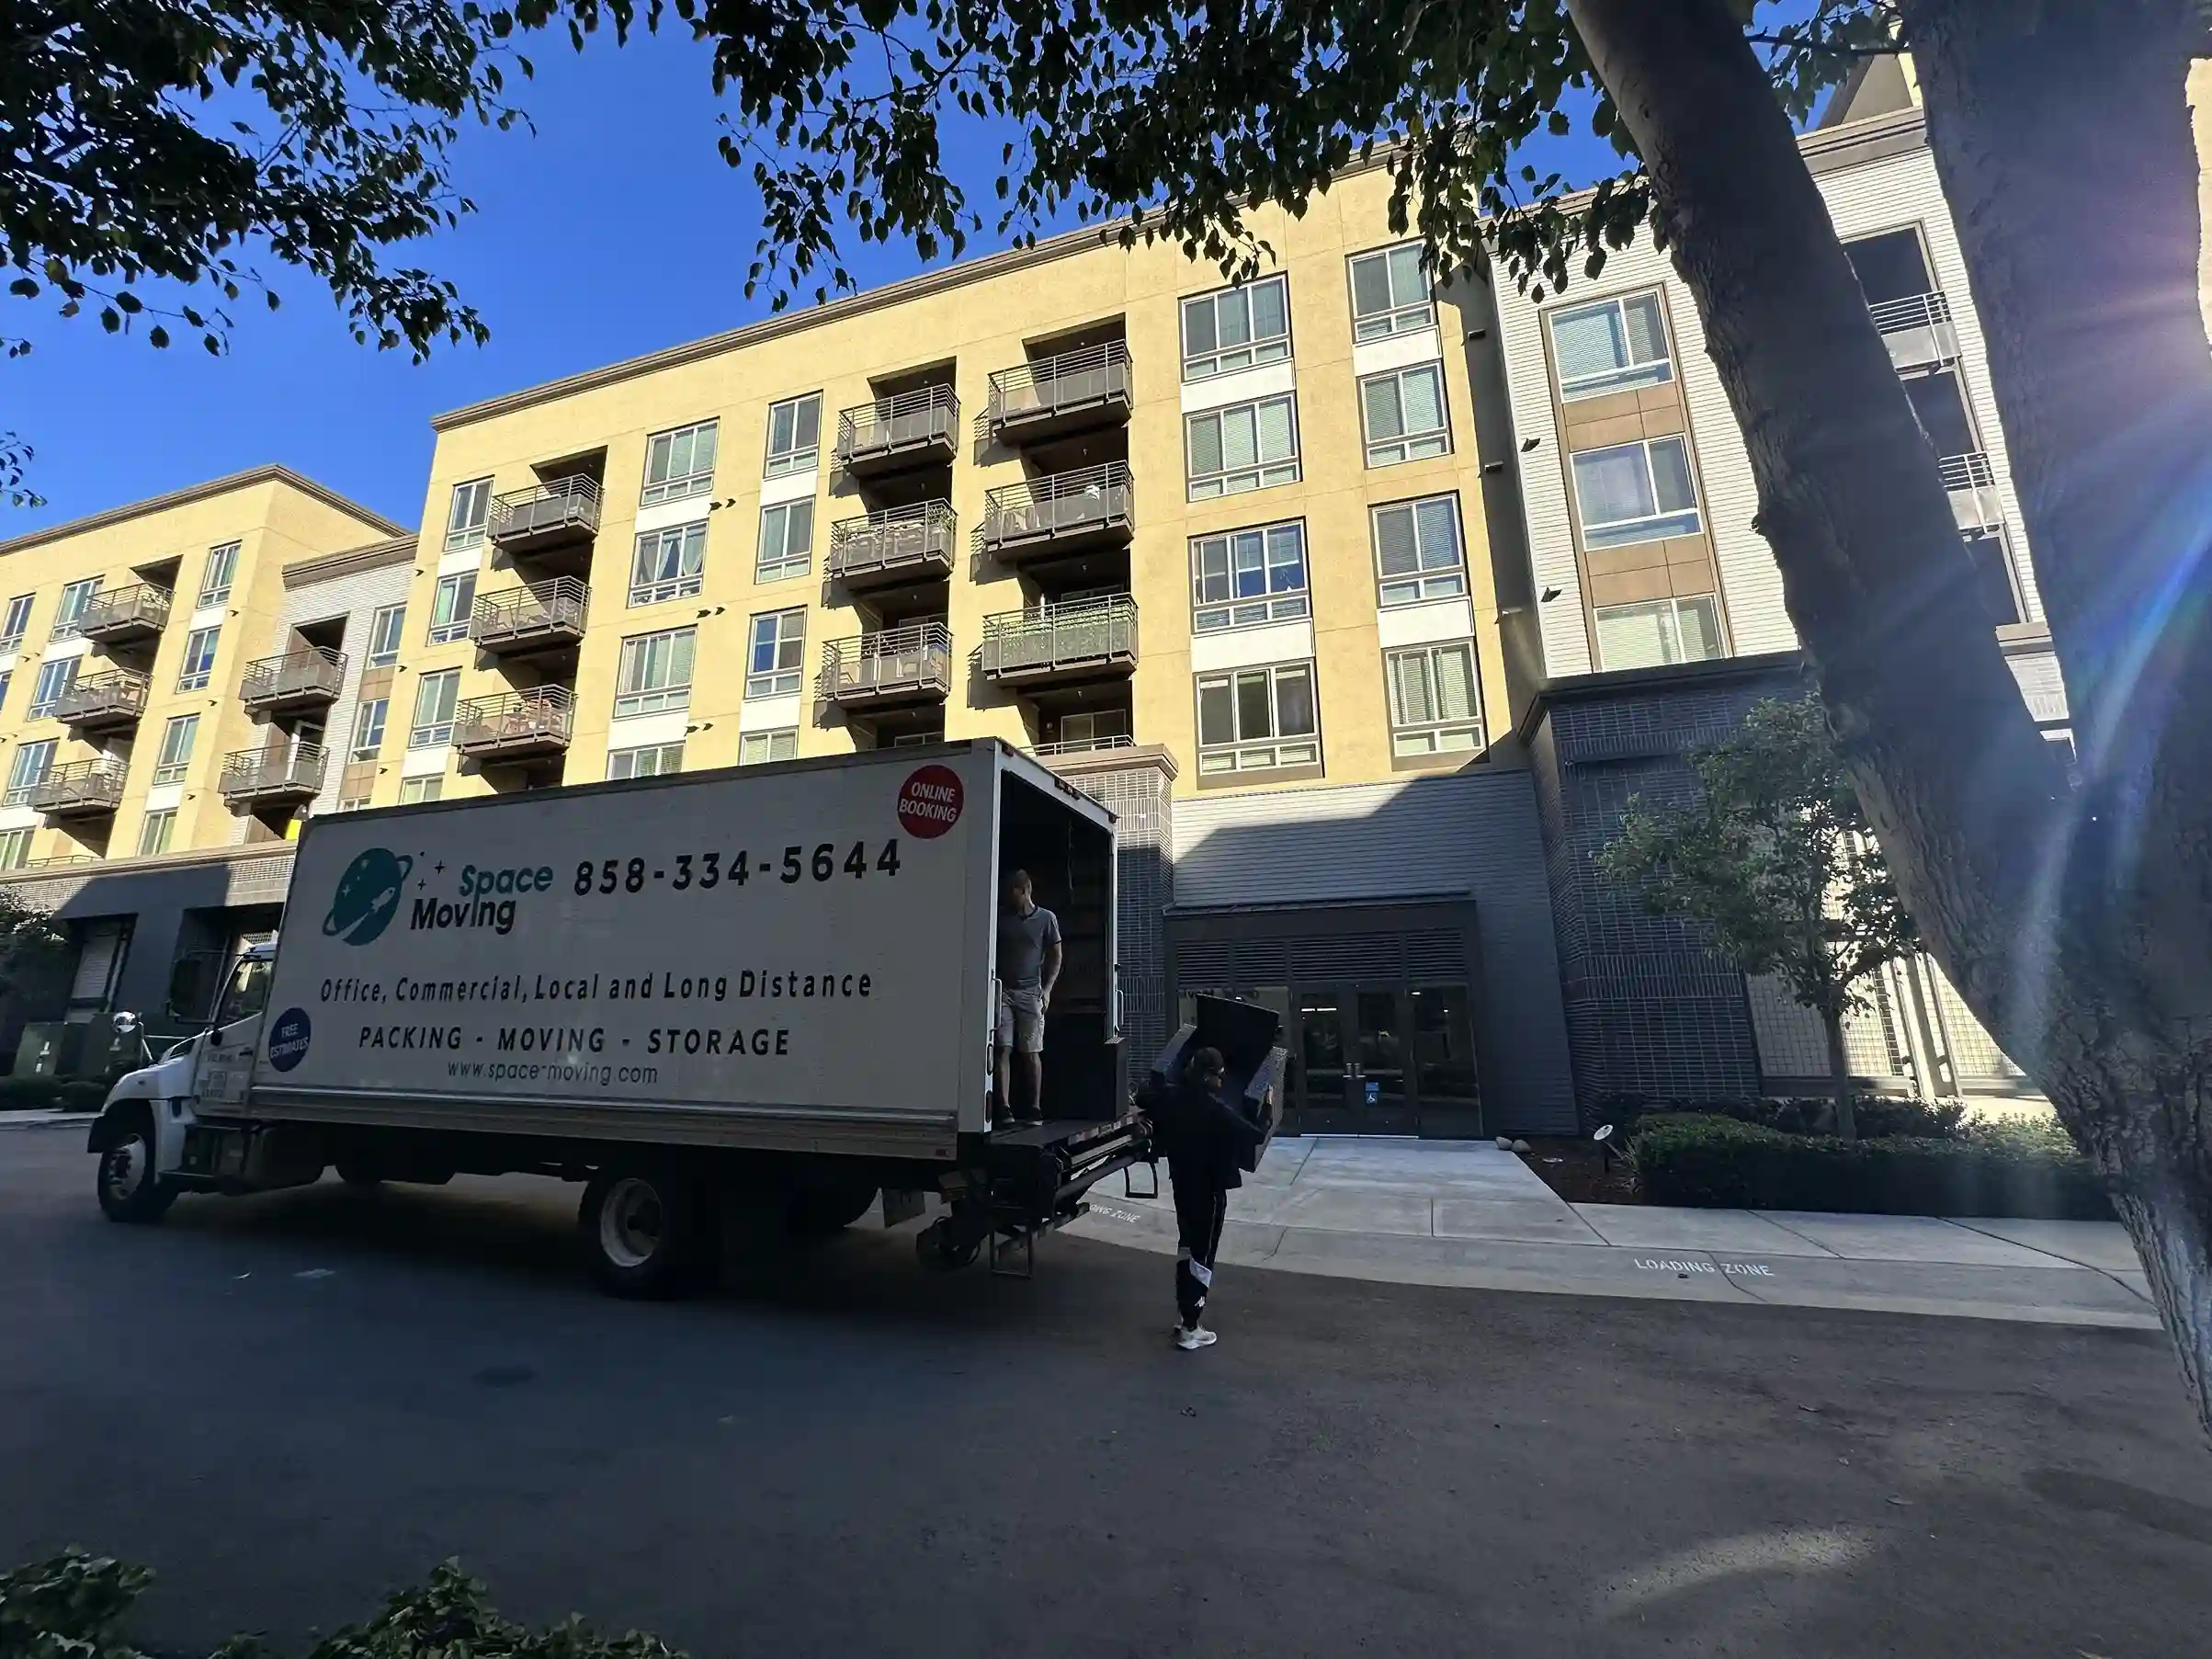 Movers Poway: Trusted Moving Services for Your Relocation Needs